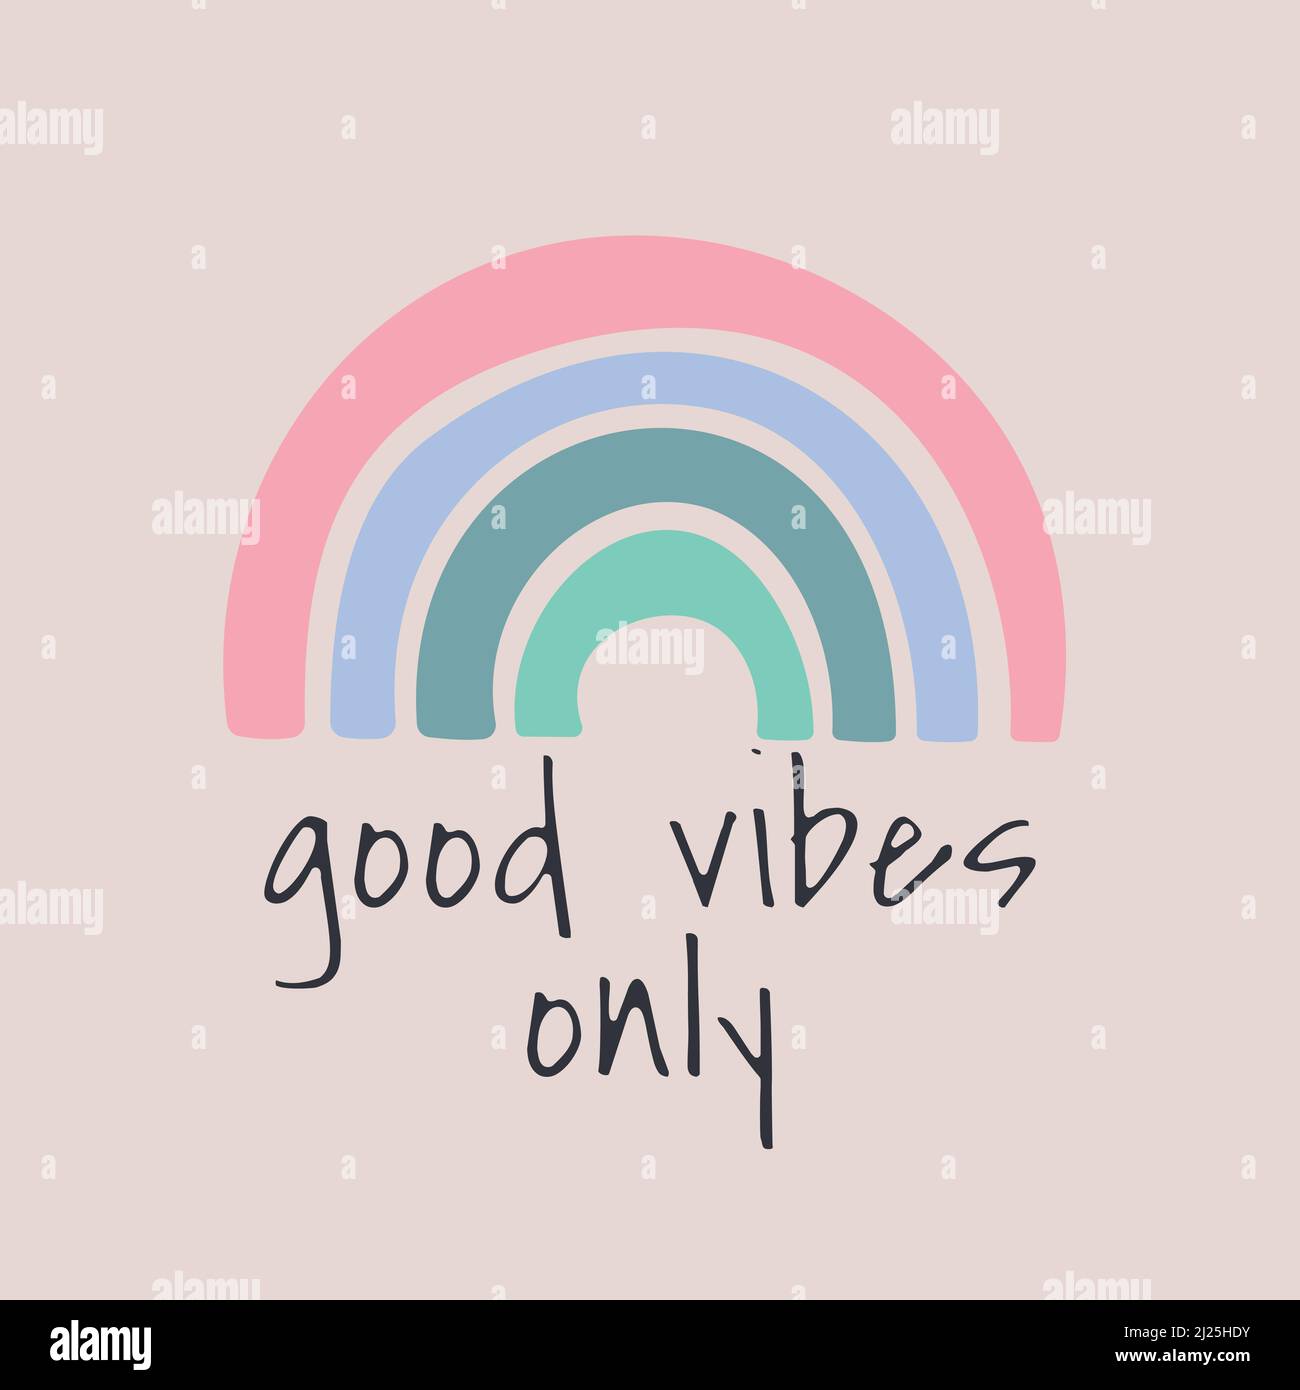 Its time for good vibes  rdrawing